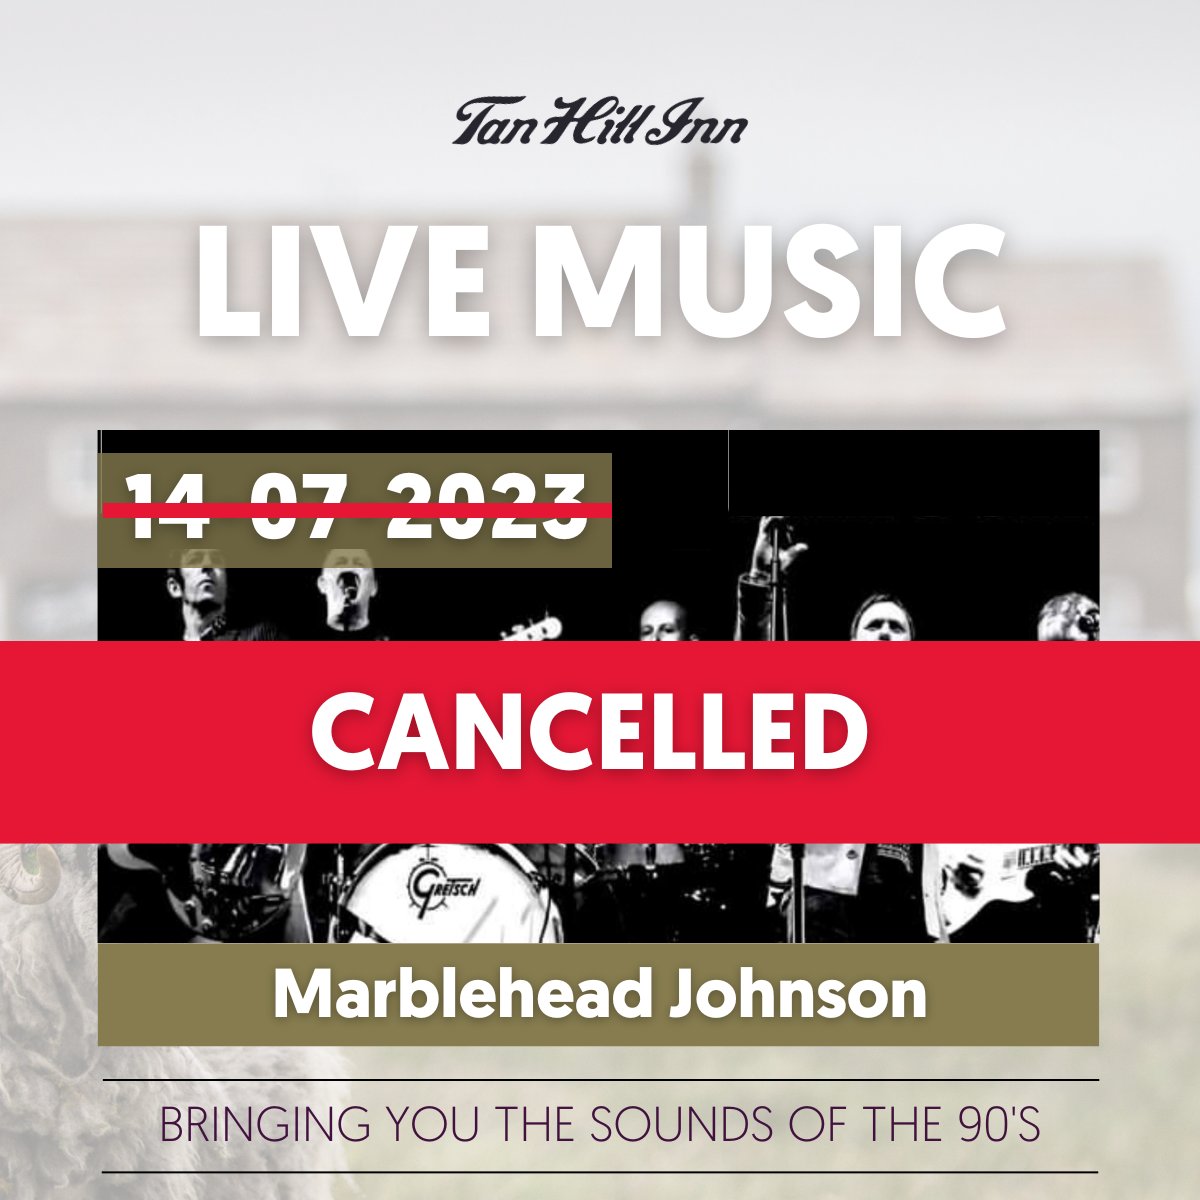 📢 Announcement 📢 Unfortunately due to illness within the band we have had to cancel this Friday nights band Marblehead Johnson. Ticket holders will be contacted via email. #Cancellation #TanHillInn #MarbleheadJohnson